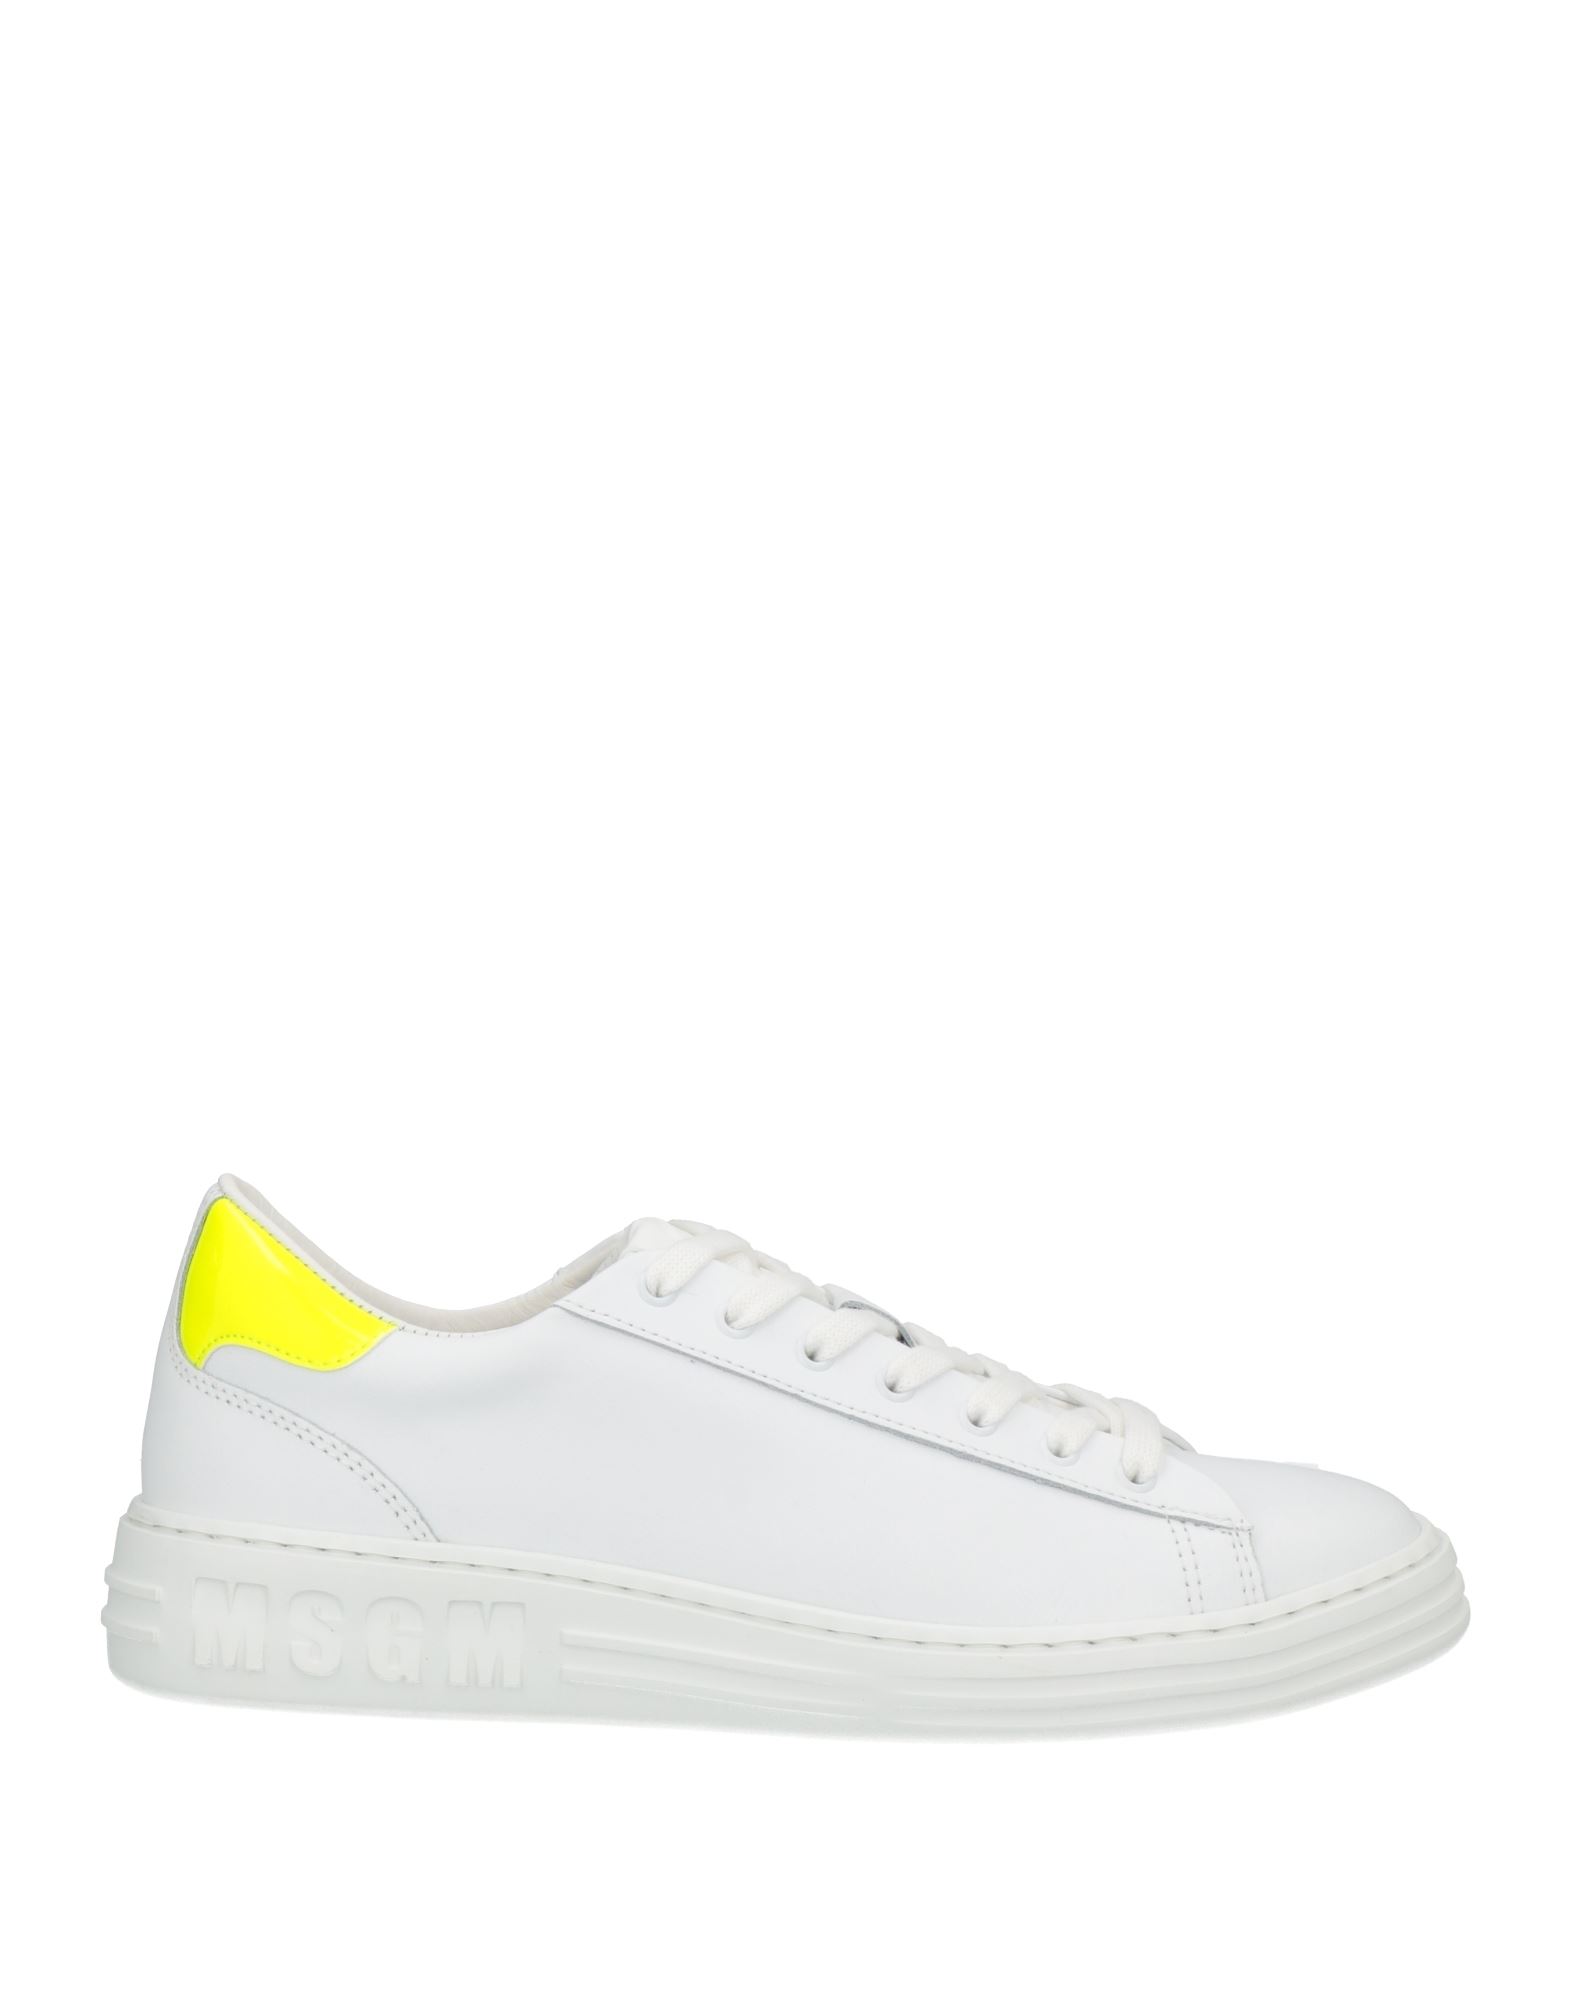 Msgm Sneakers In Yellow